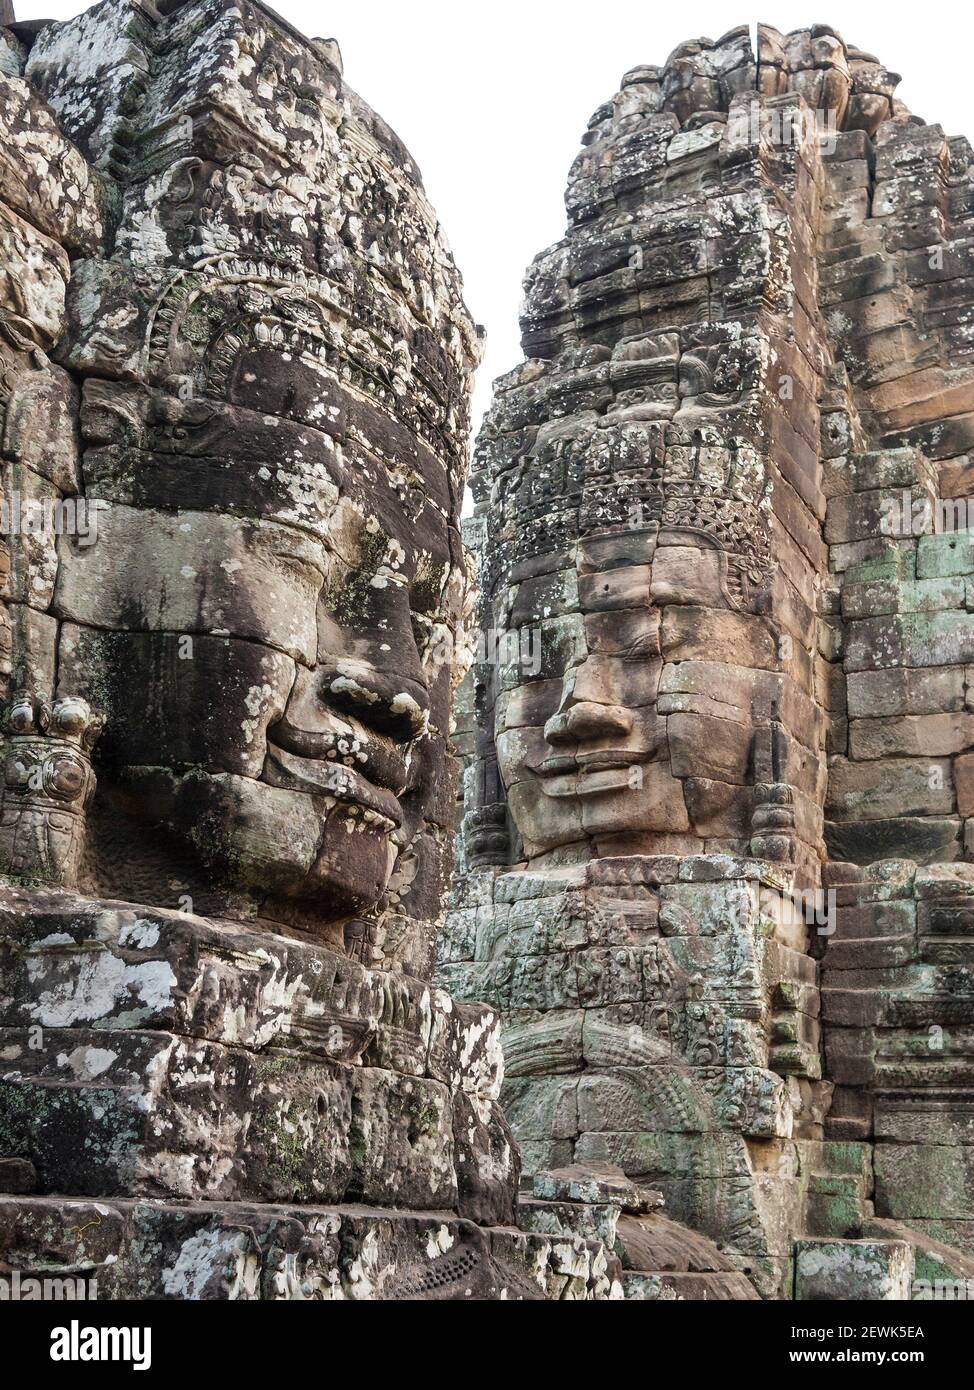 The Bayon is a well-known and richly decorated Khmer temple at Angkor in Cambodia. Built in the late 12th century or early 13th century as the Stock Photo